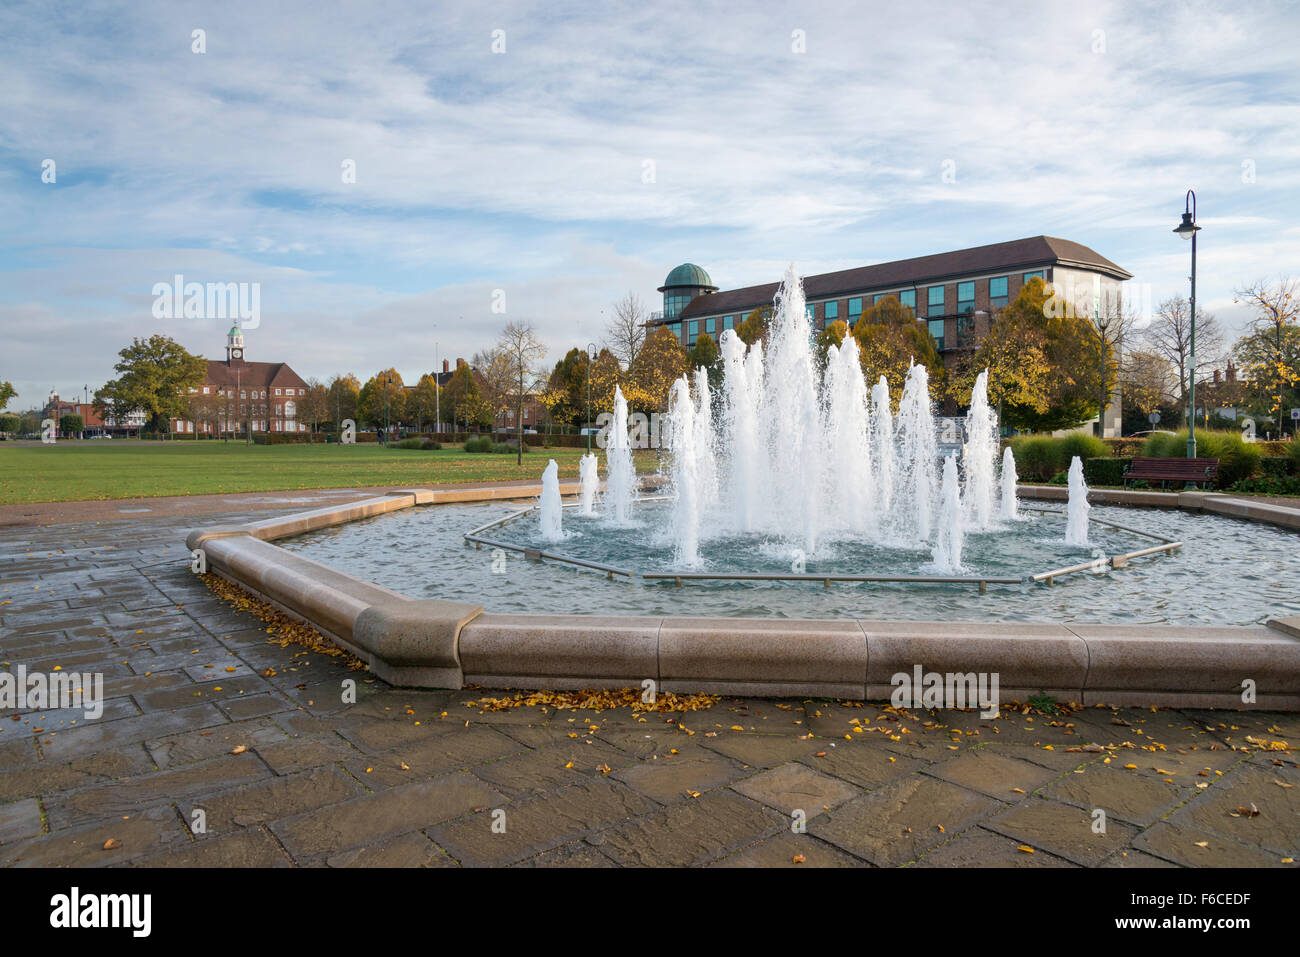 A fountain and view across a park and garden in Letchworth Garden City Hertfordshire UK Stock Photo